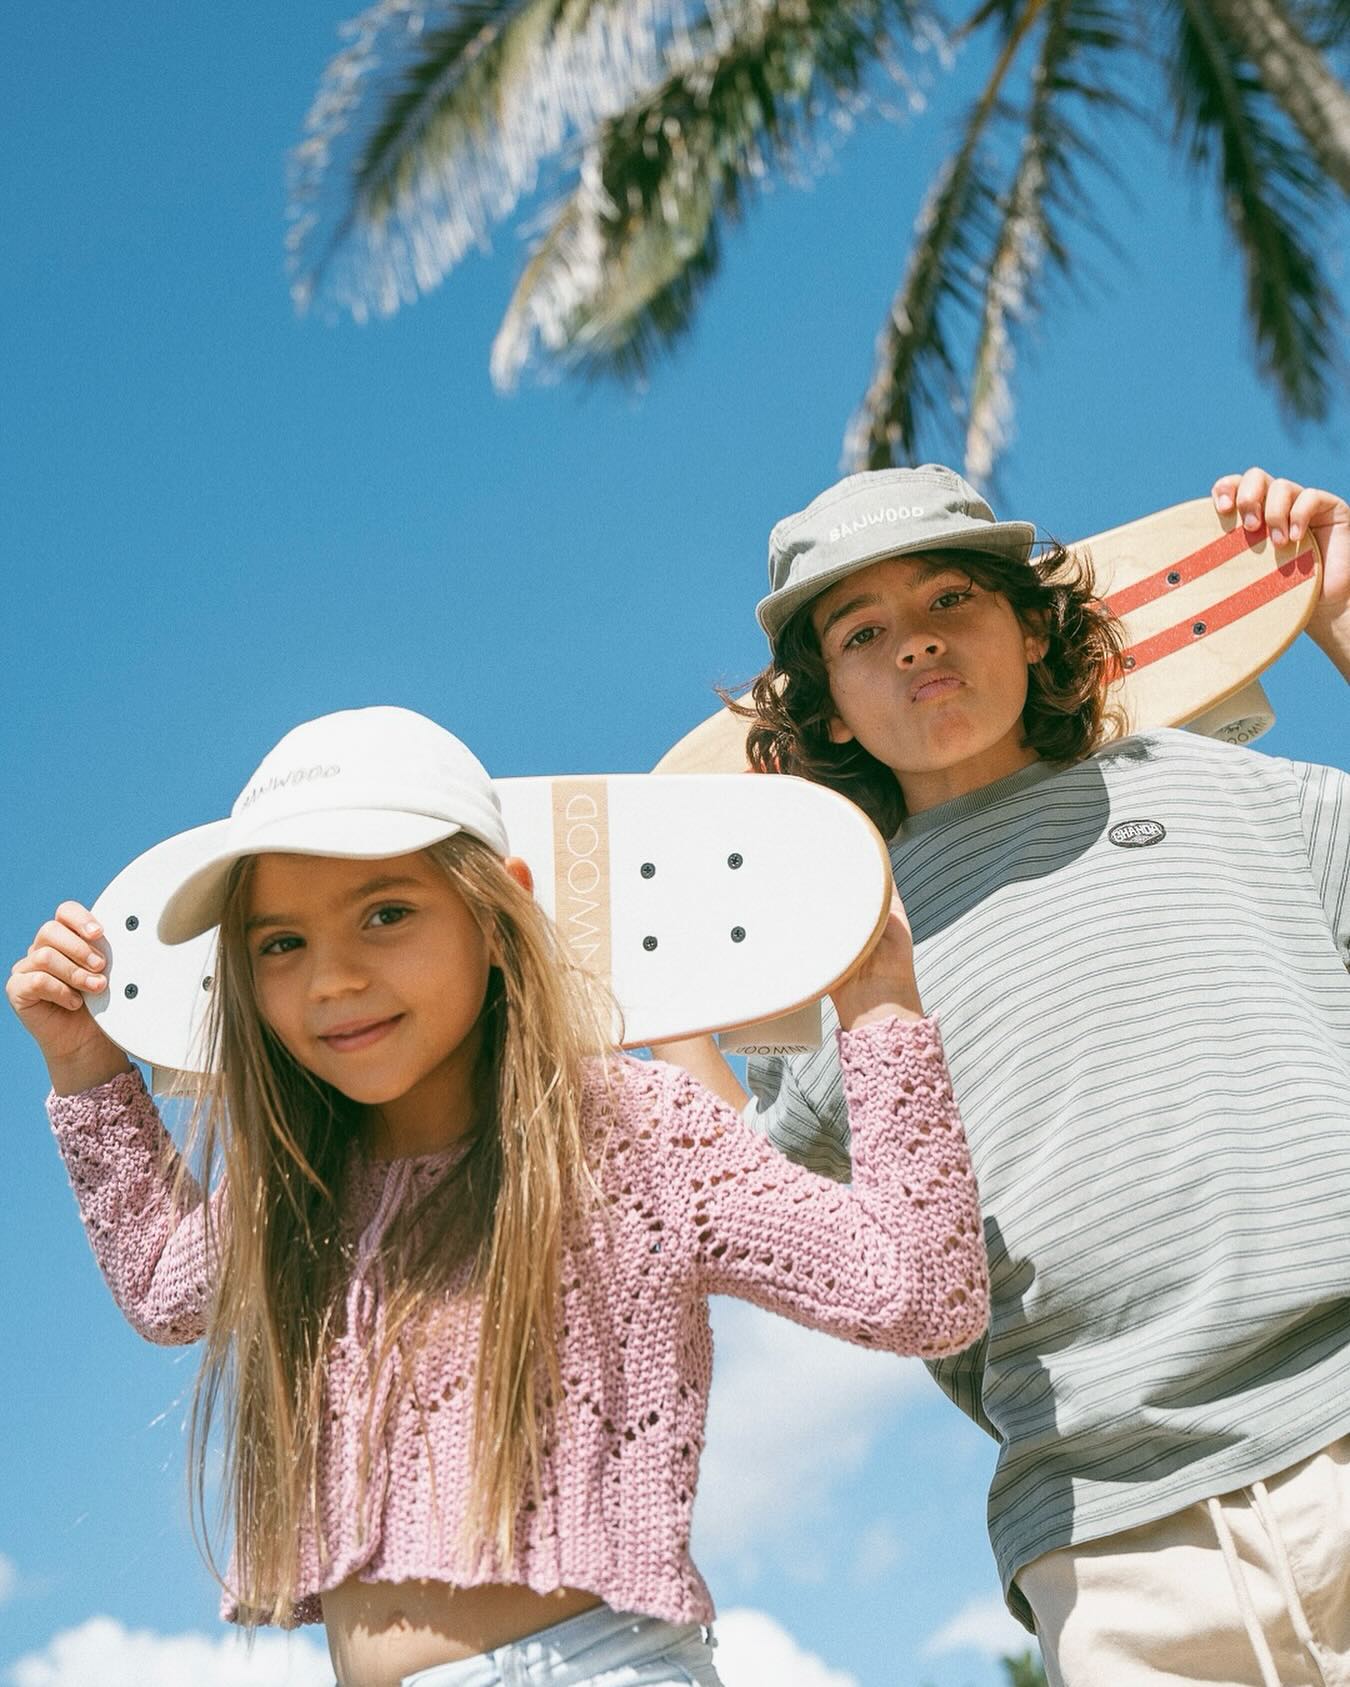 Introducing our timeless Baseball Cap and 5-panel Cap, available for everyone from babies to adults in washed solid colorsGet ready to purchase yours on Wednesday, June 12th